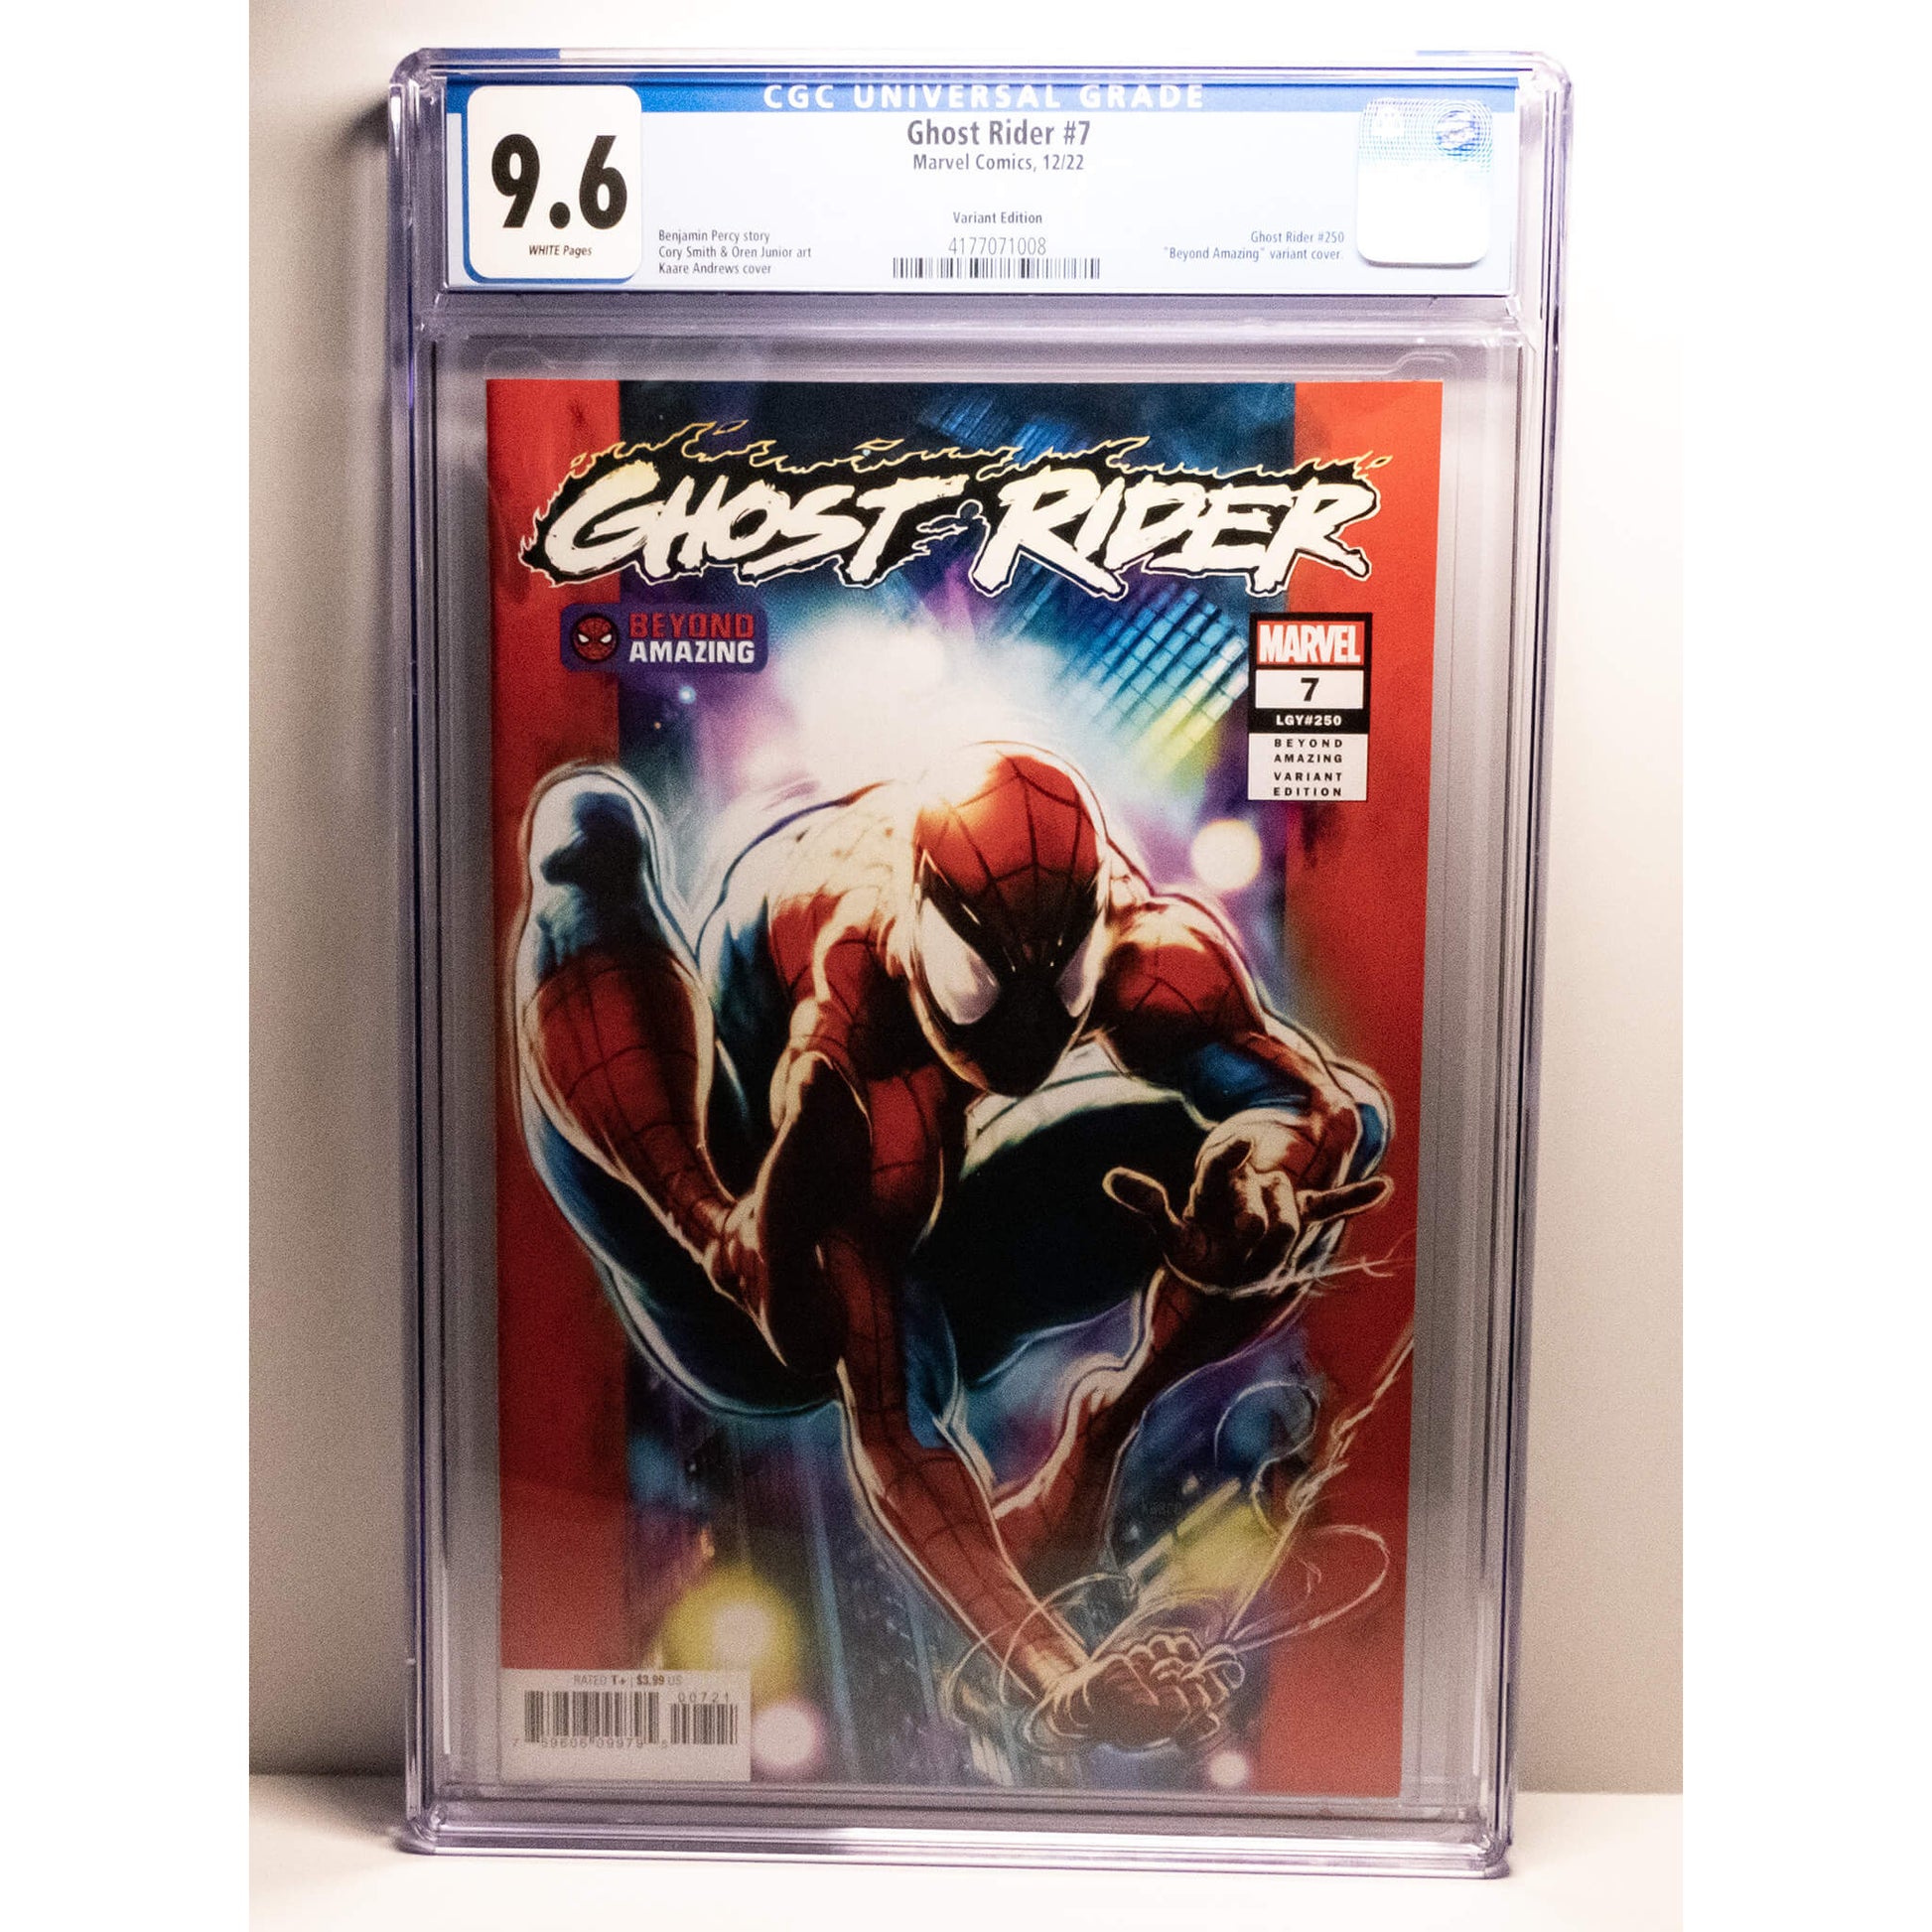 ghost rider spider man variant cover cgc 9.6 at End of Earth One